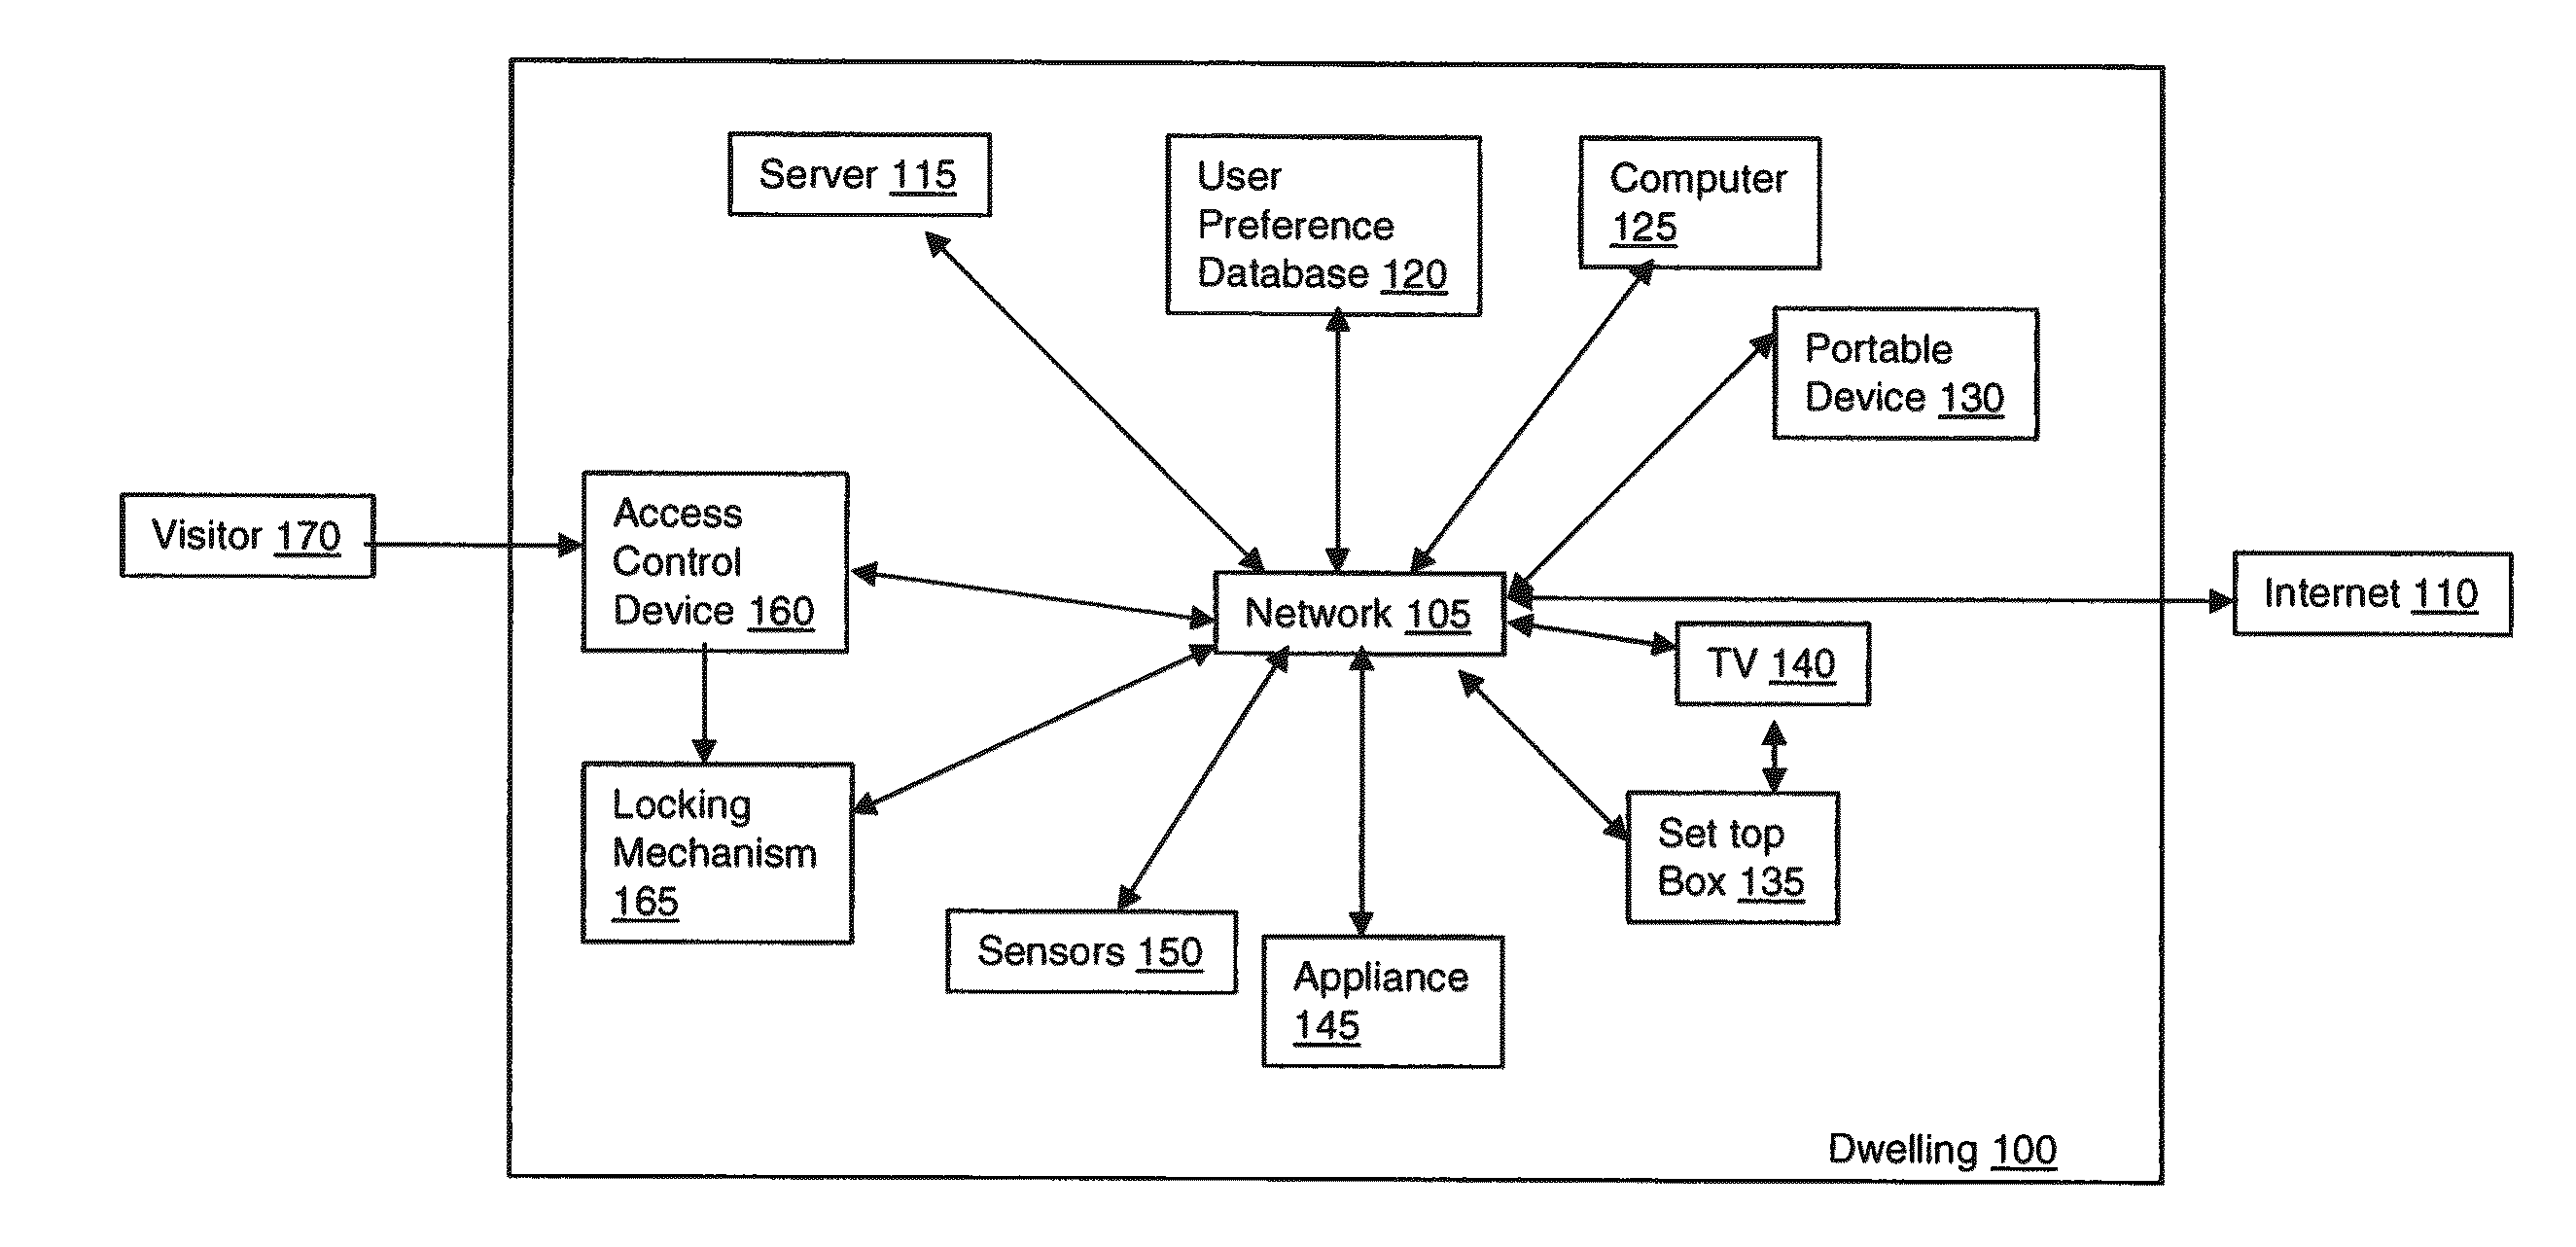 Method and apparatus for controlling access to a home using visual cues